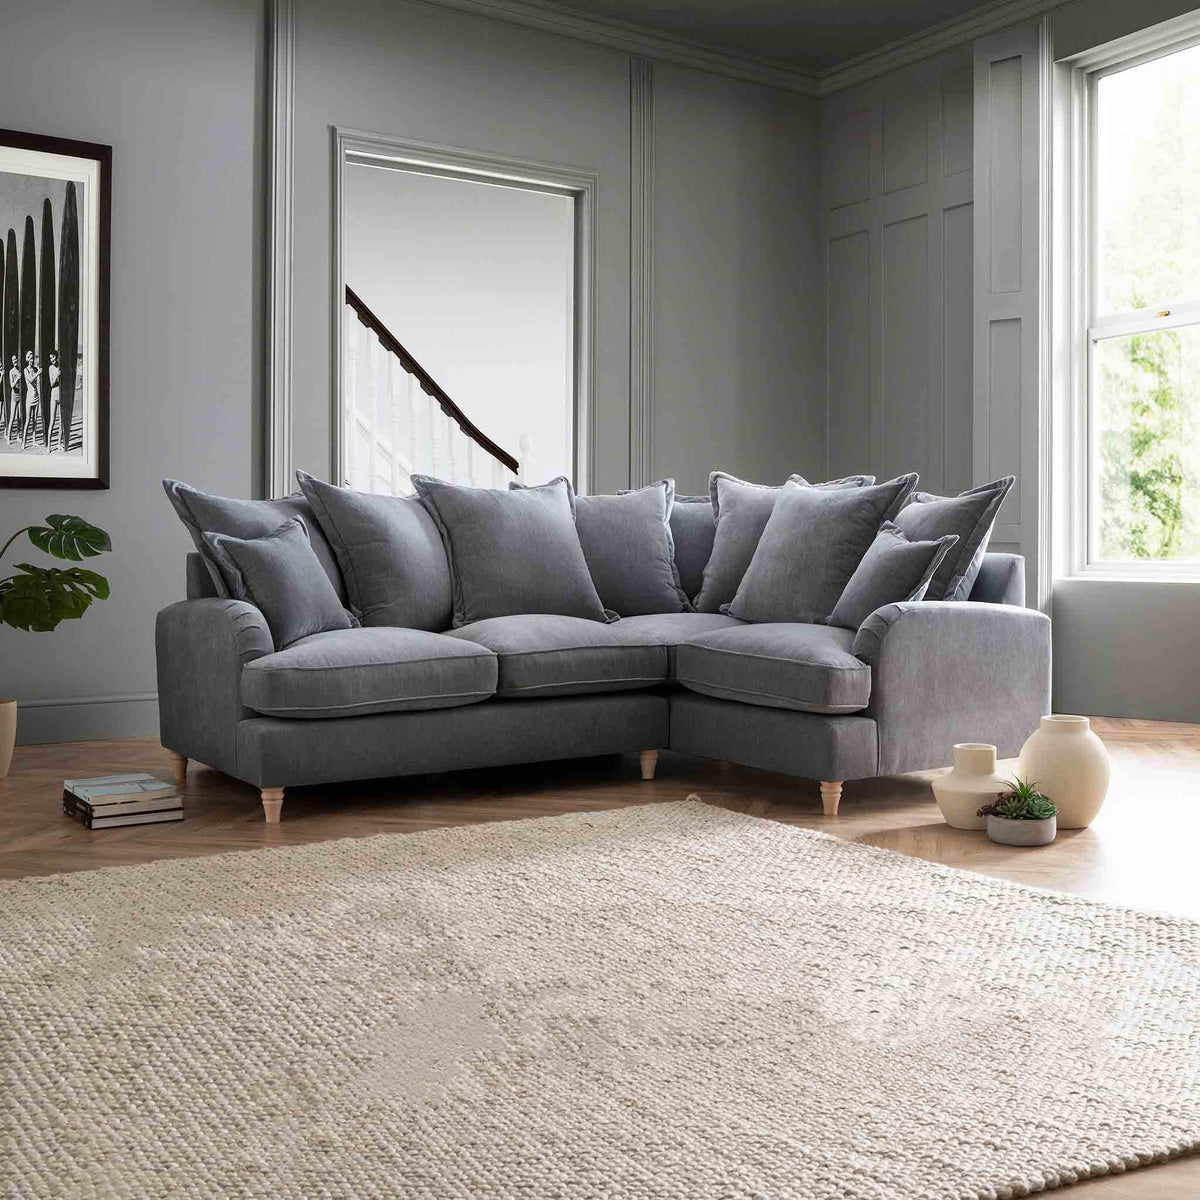 Rupert Charcoal Grey 2 Corner 1 Right Hand Sofa Couch for living room